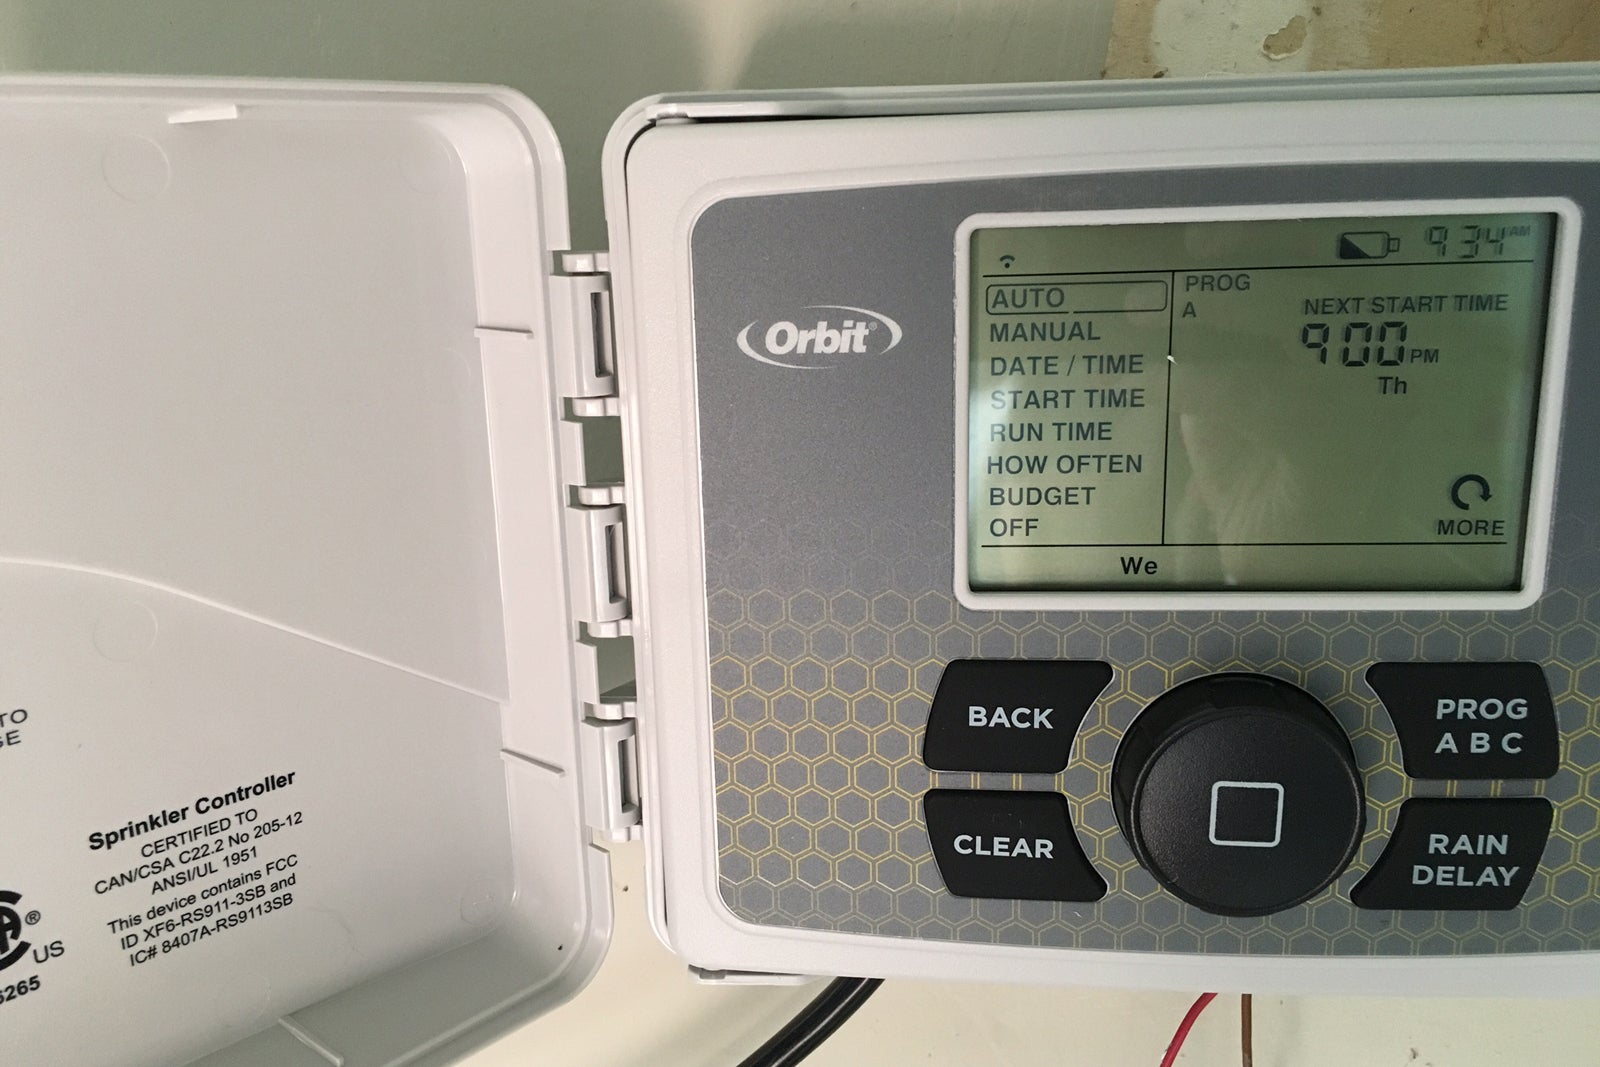 orbit-b-hyve-wifi-sprinkler-timer-review-two-ways-to-control-your